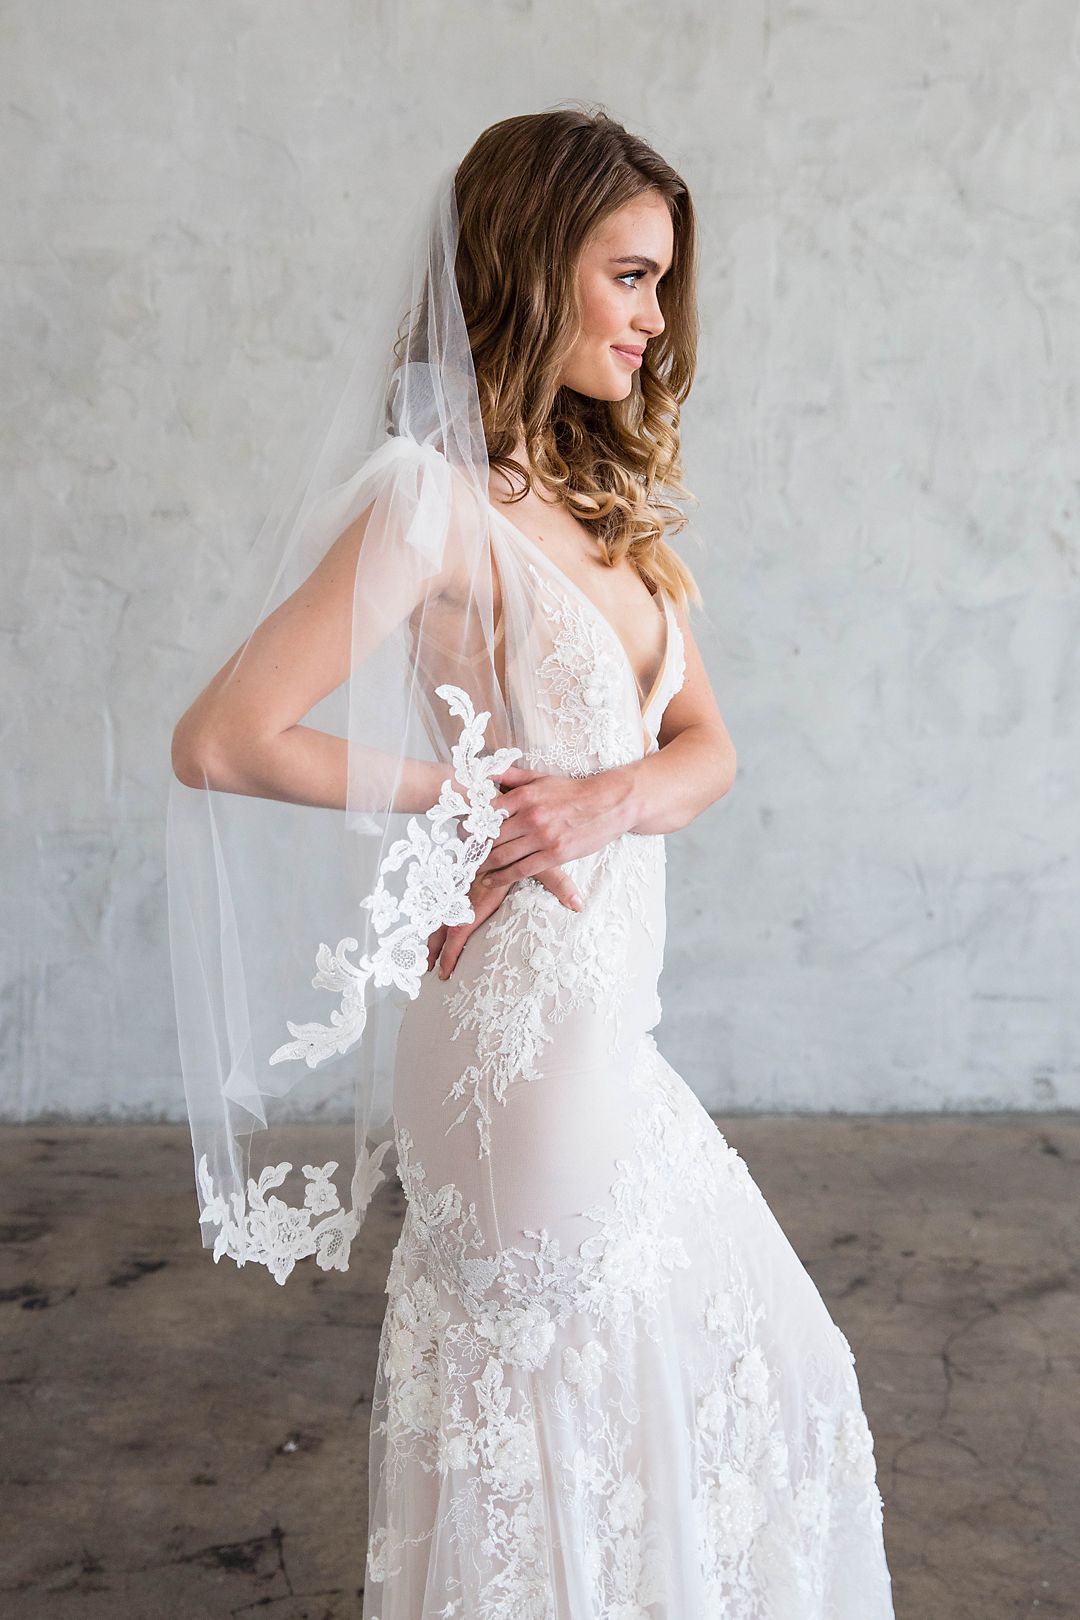 Tulle Veil with Alencon Lace Edge Image